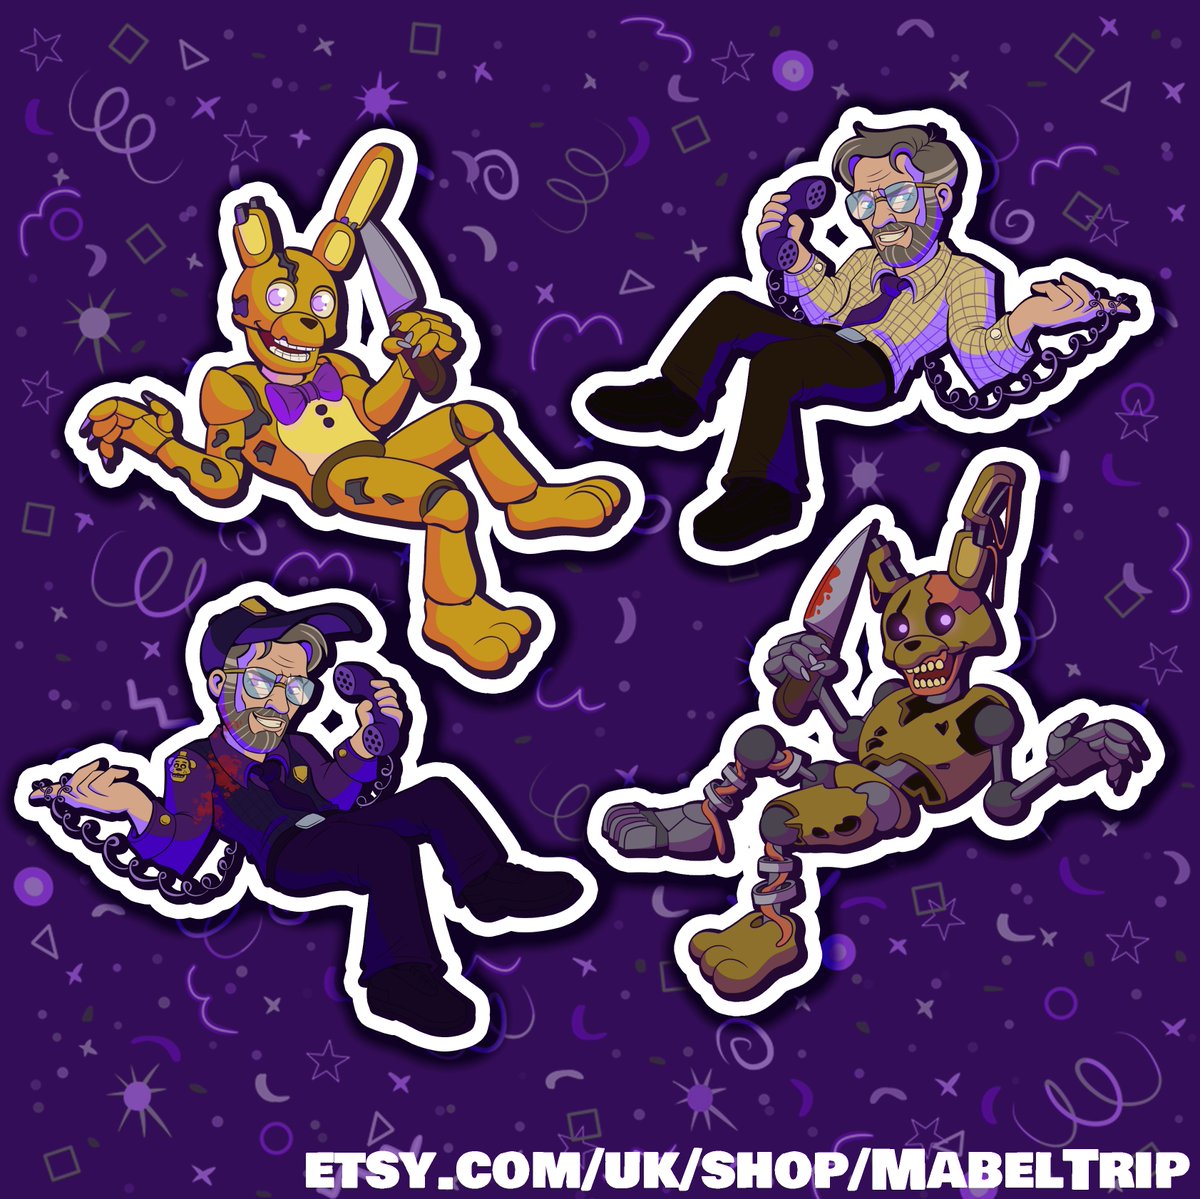 Got on the Afton train and drew many version 🐰 They're available on my Etsy as stickers too! etsy.com/uk/shop/MabelT… #FNAFMovie #afton #Williamafton #springtrap